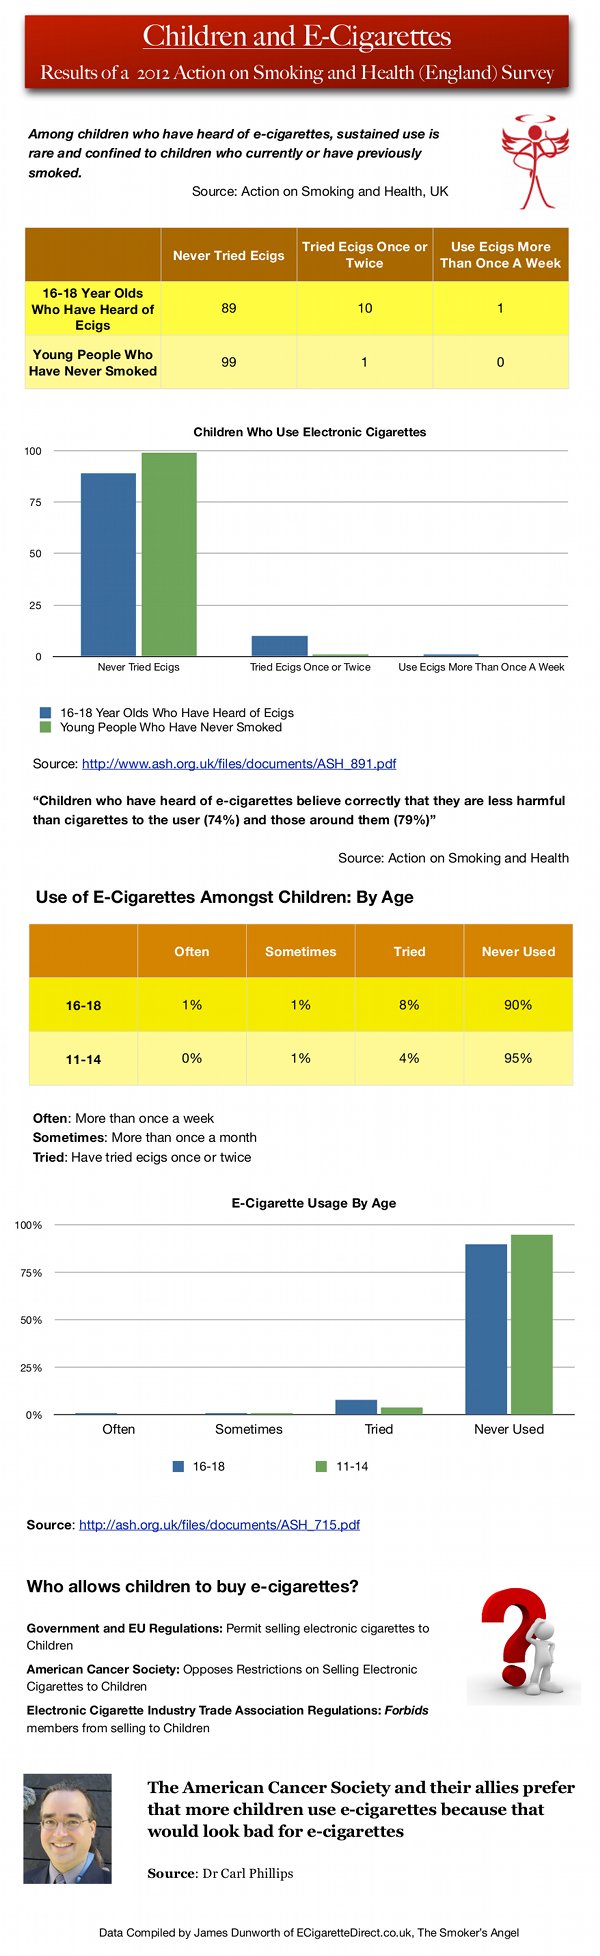 Children and Ecigarettes - The Facts